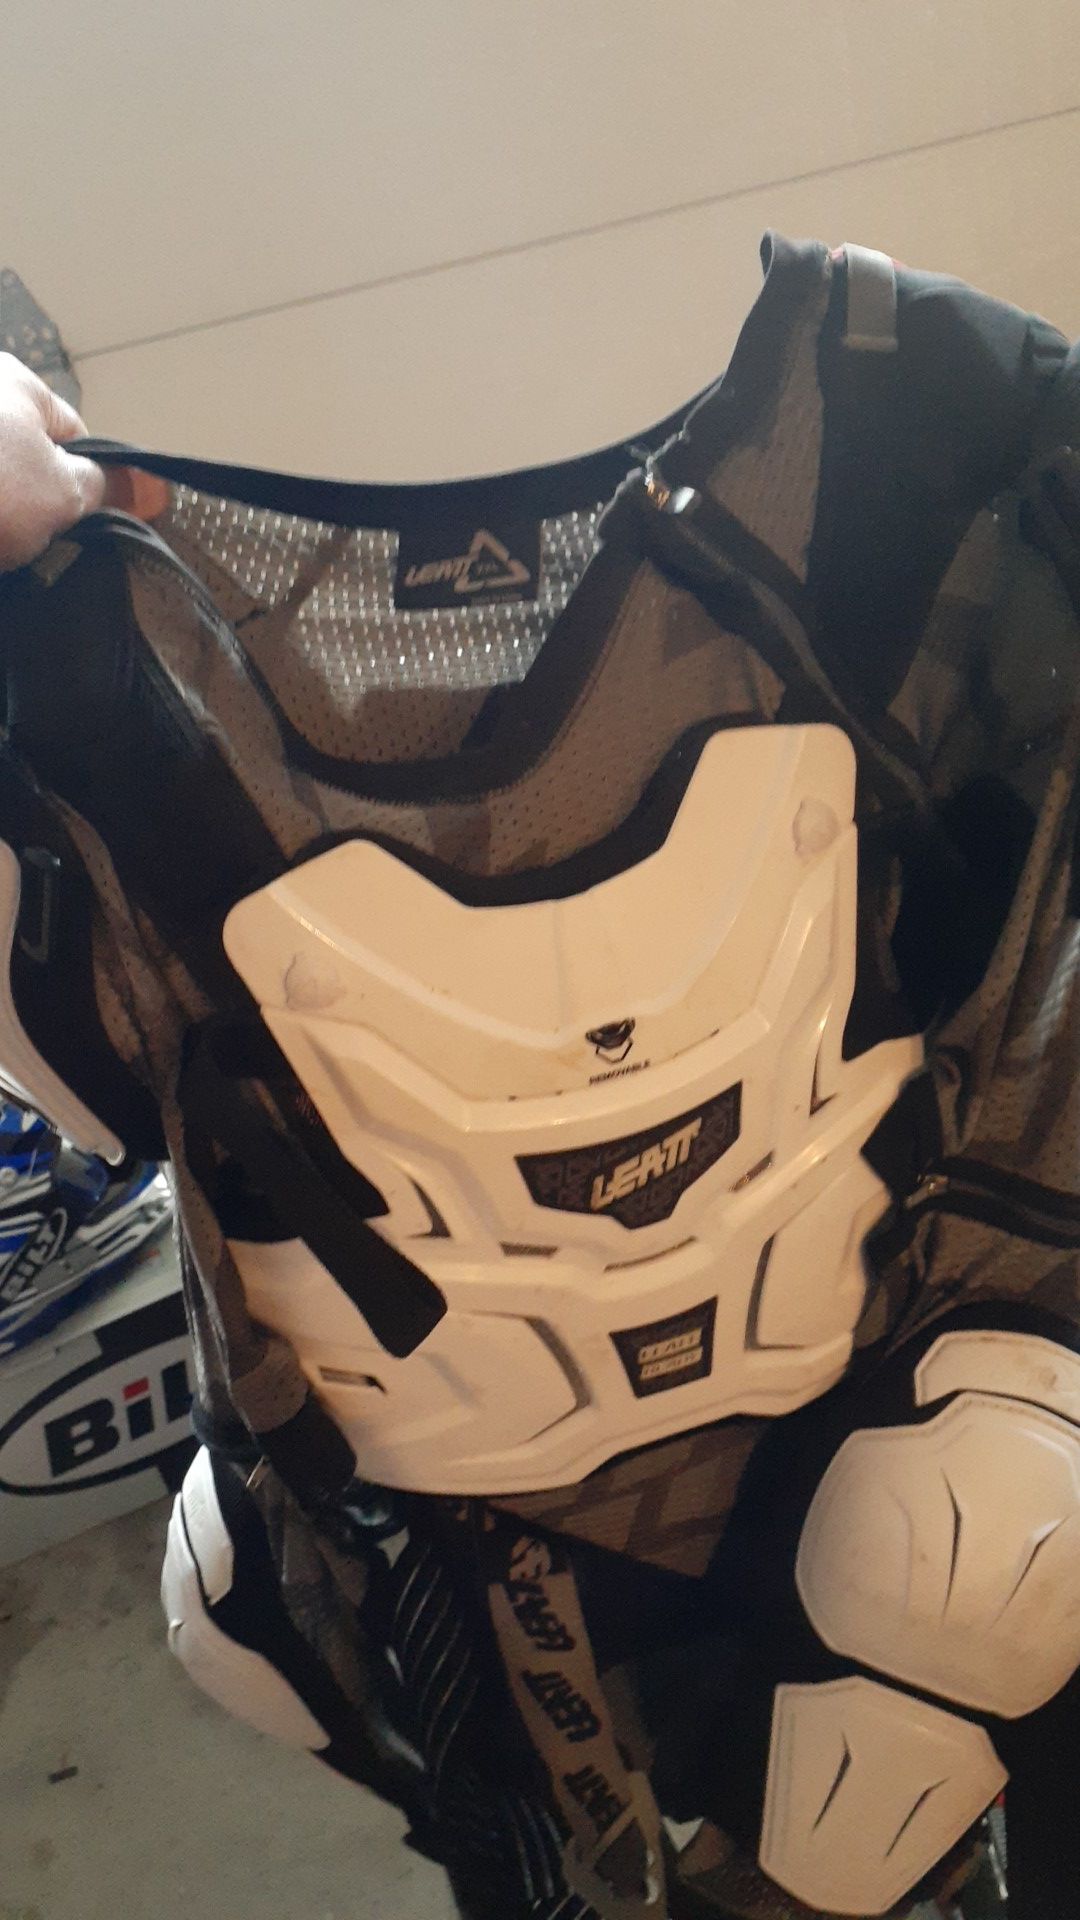 Leatt chest protector, riding pants and bilt gloves